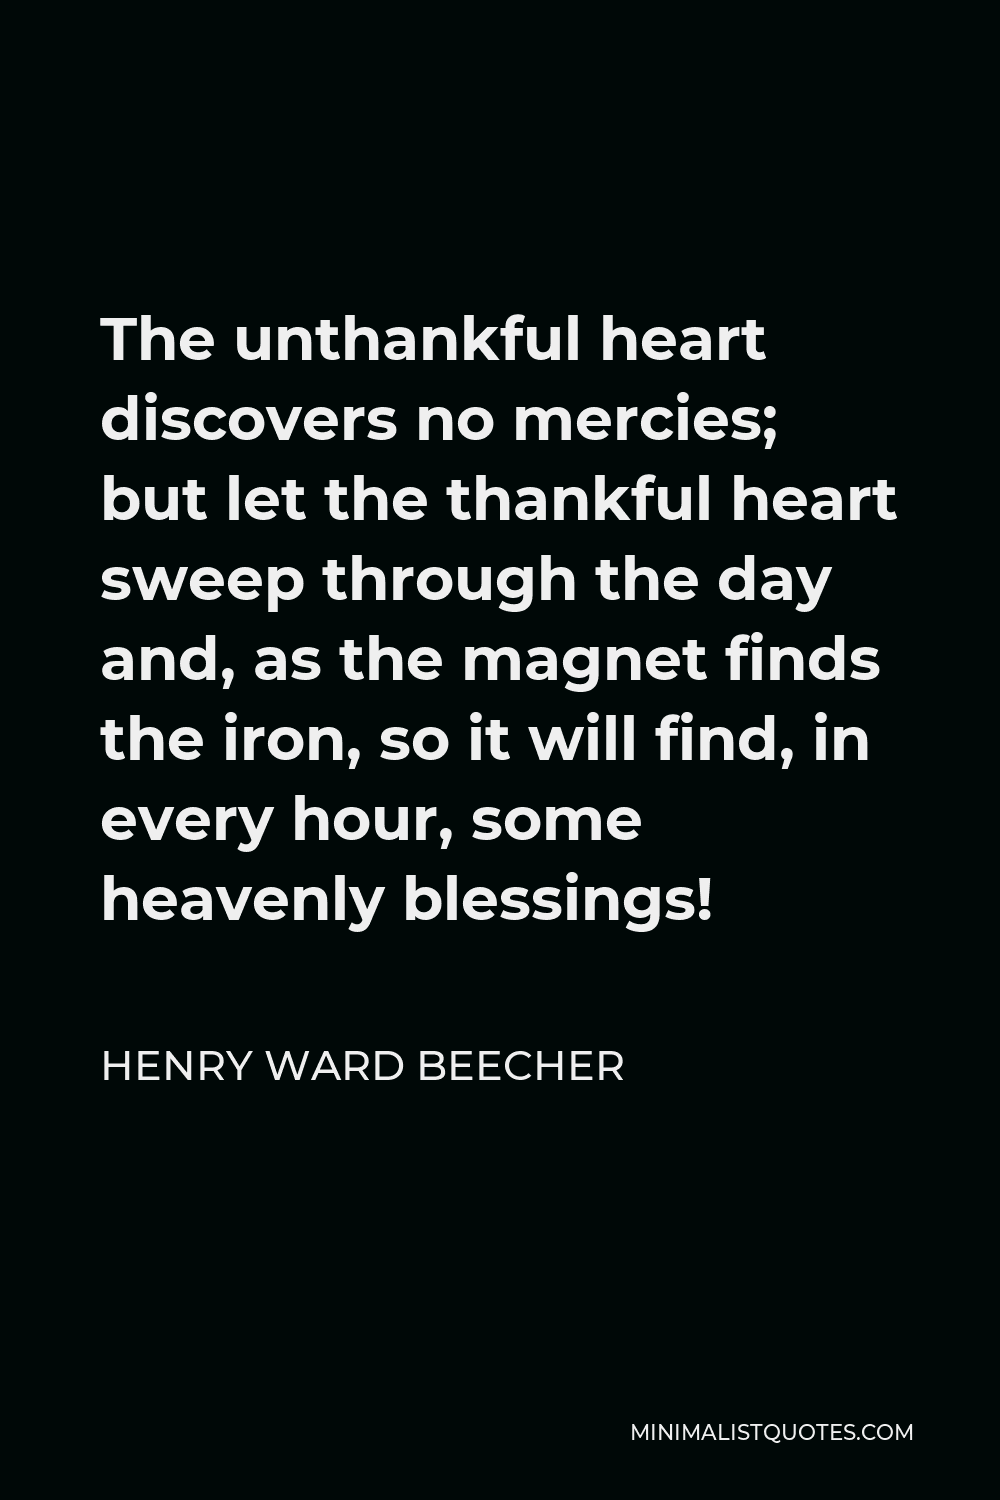 Henry Ward Beecher Quote - The unthankful heart discovers no mercies; but let the thankful heart sweep through the day and, as the magnet finds the iron, so it will find, in every hour, some heavenly blessings!